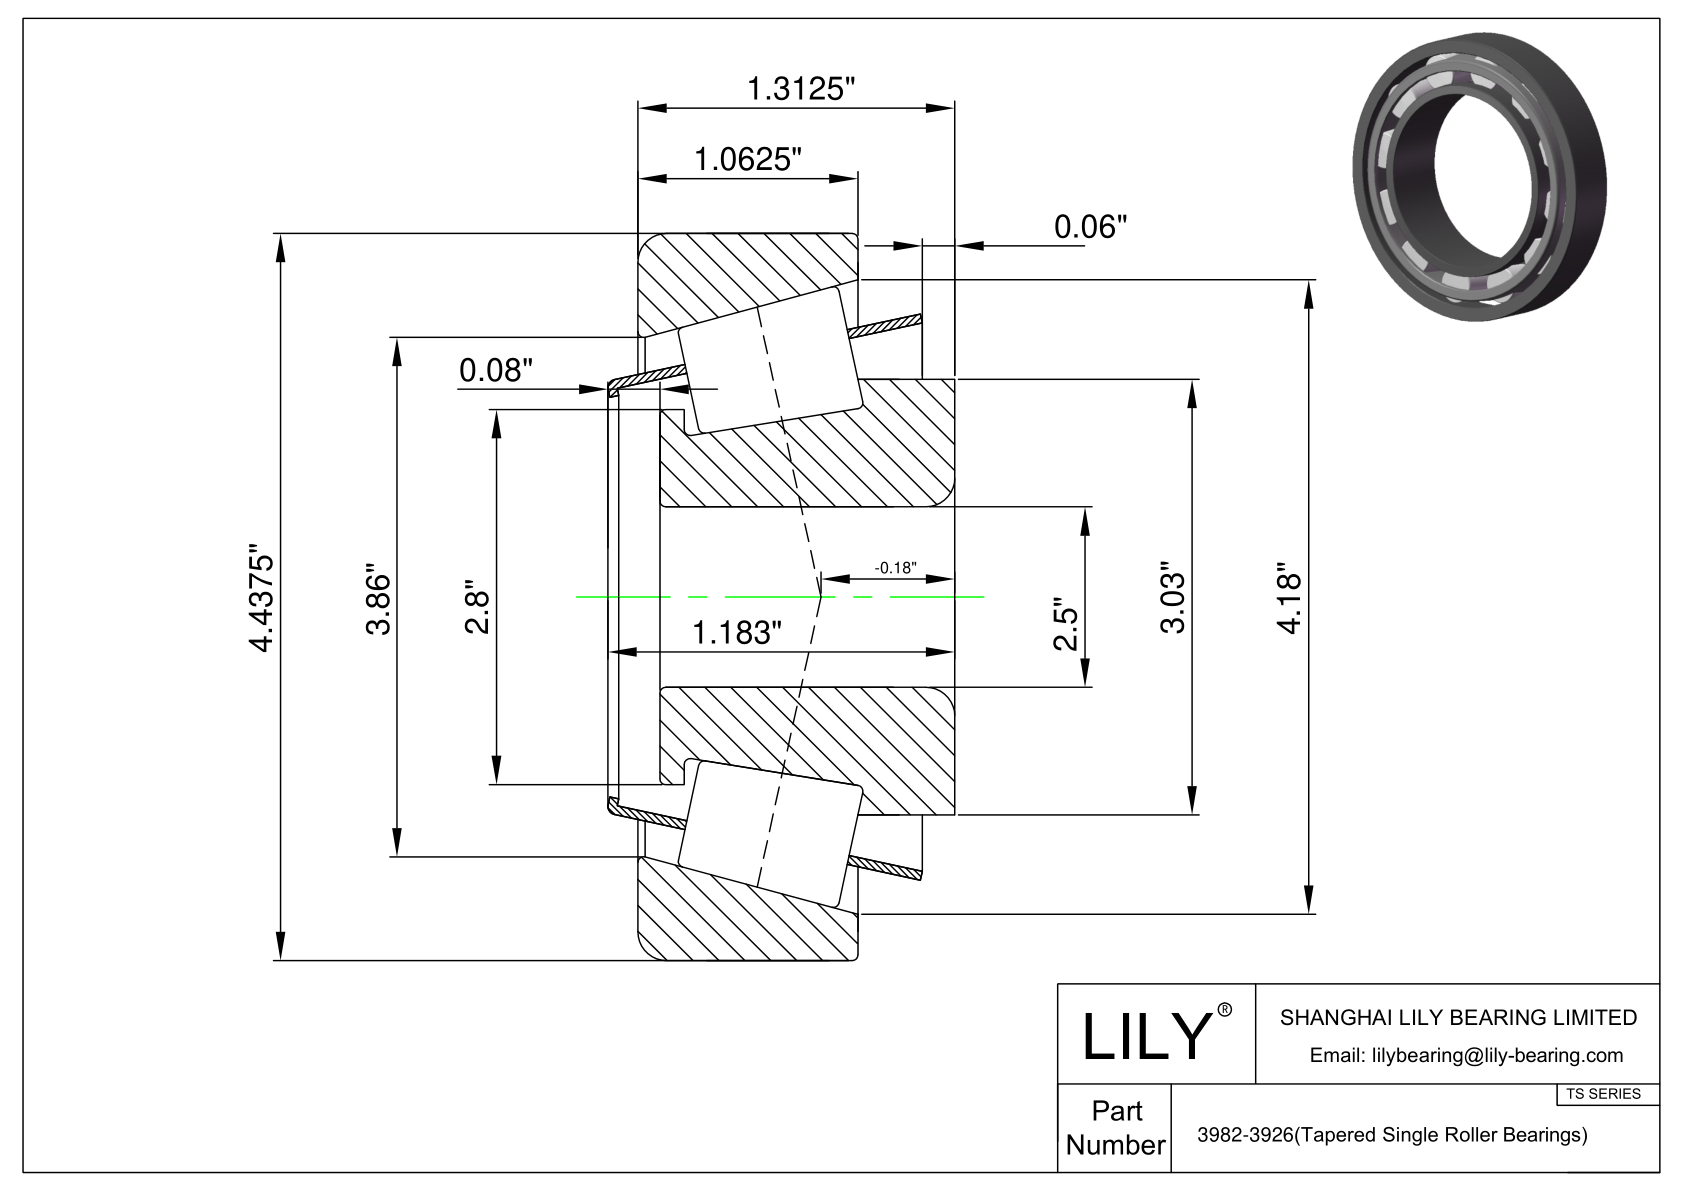 3982-3926 TS (Tapered Single Roller Bearings) (Imperial) cad drawing